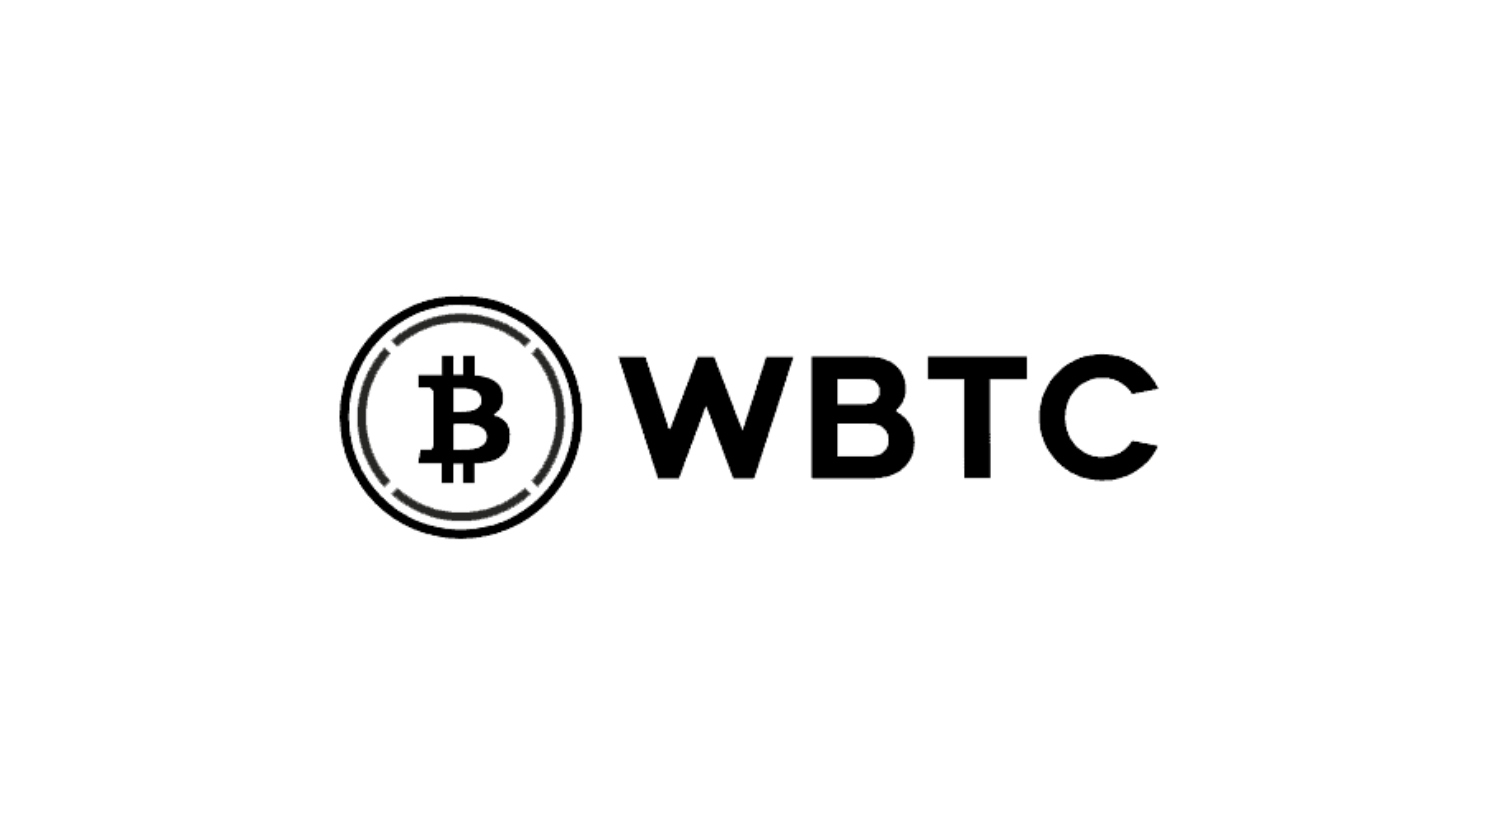 Wrapped Bitcoin (WBTC). What is it?